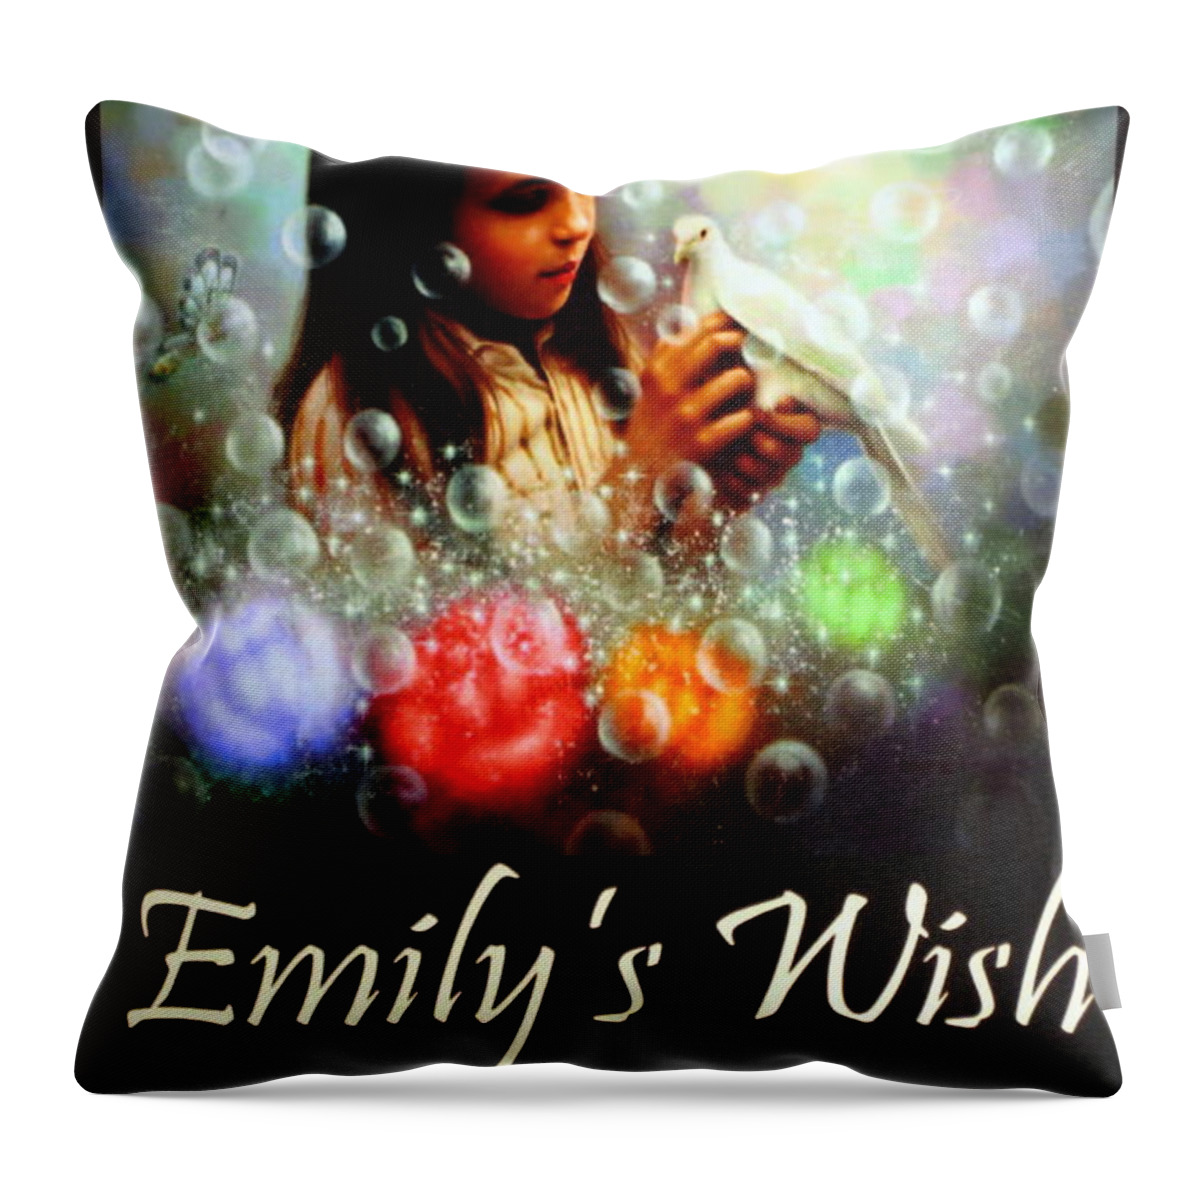 Original Throw Pillow featuring the painting Emily's Wish - Book Cove by Yoo Choong Yeul